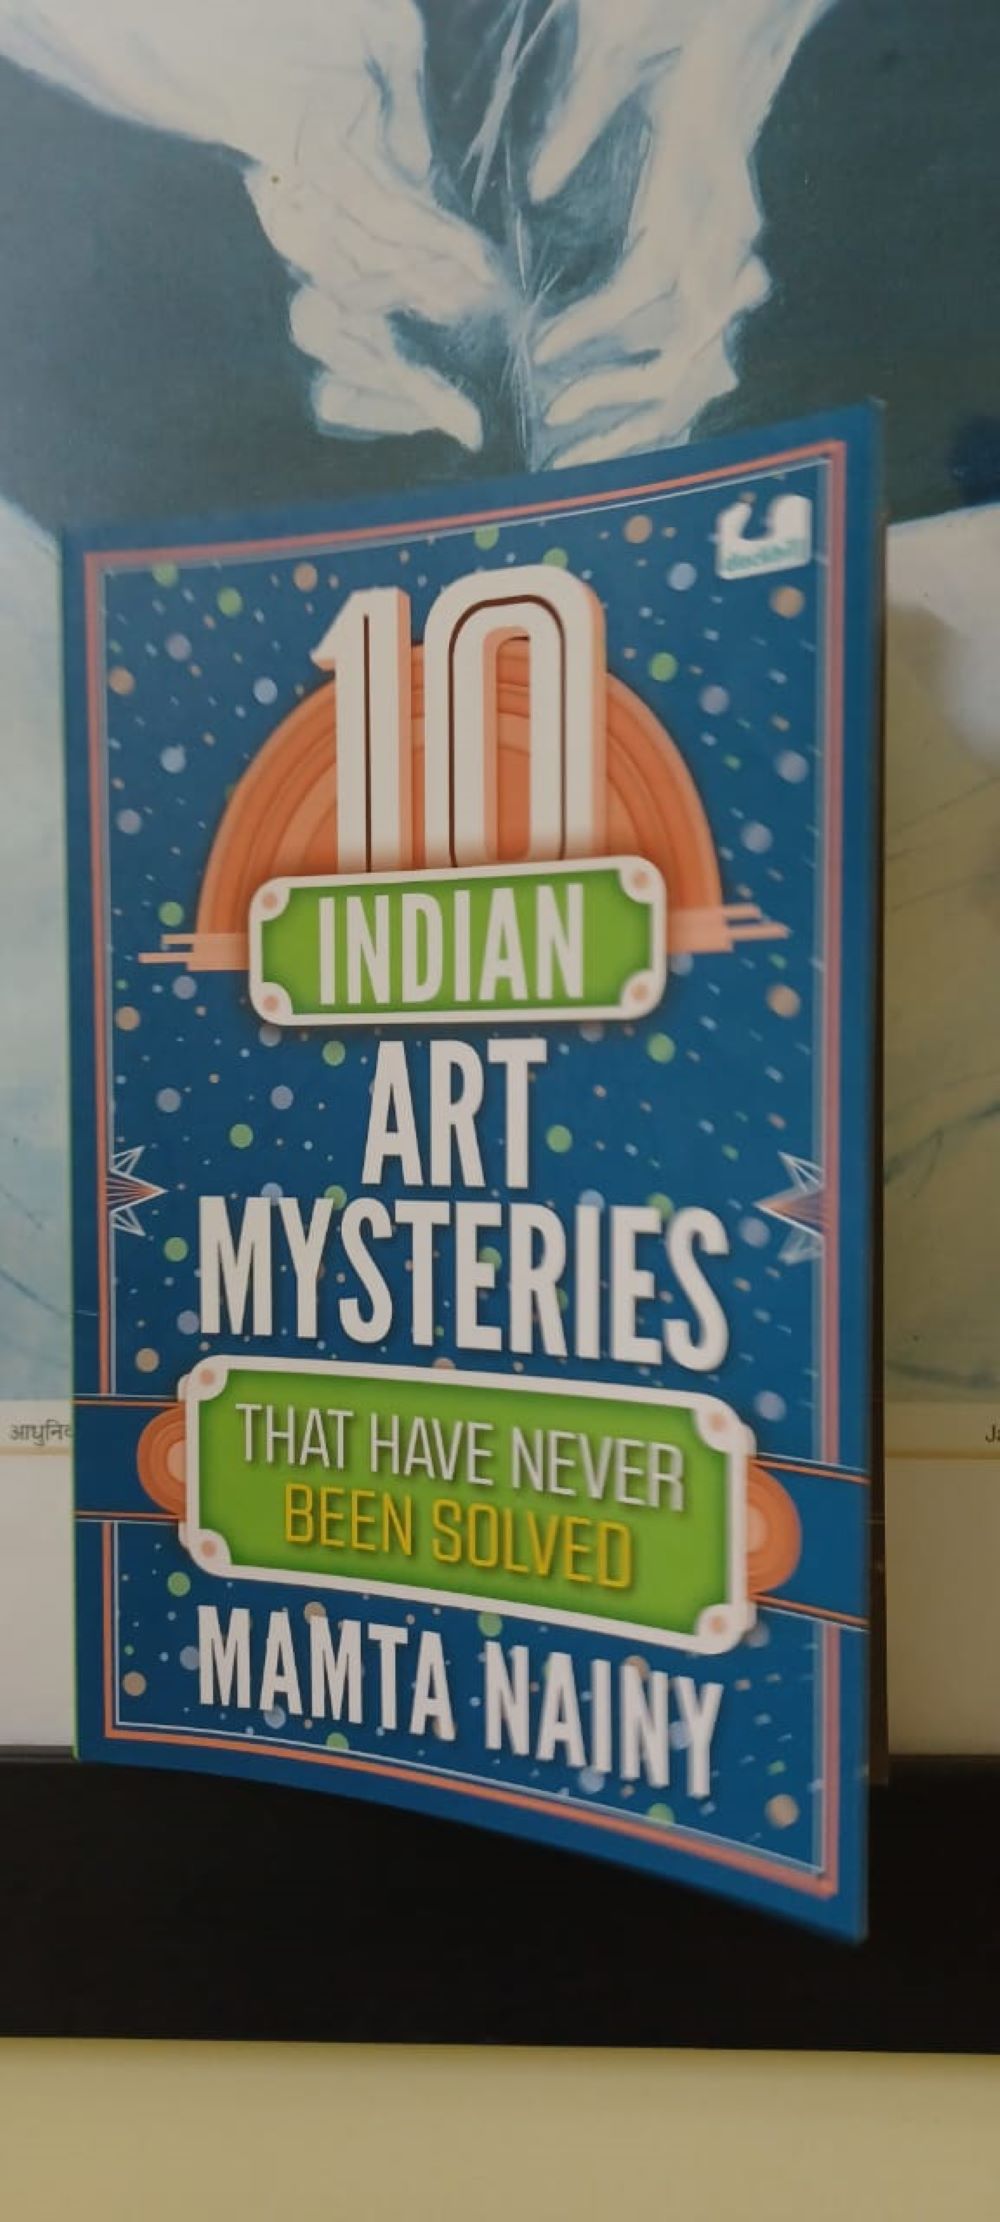 Review: 10 Indian Art Mysteries THAT HAVE NEVER BEEN SOLVED!